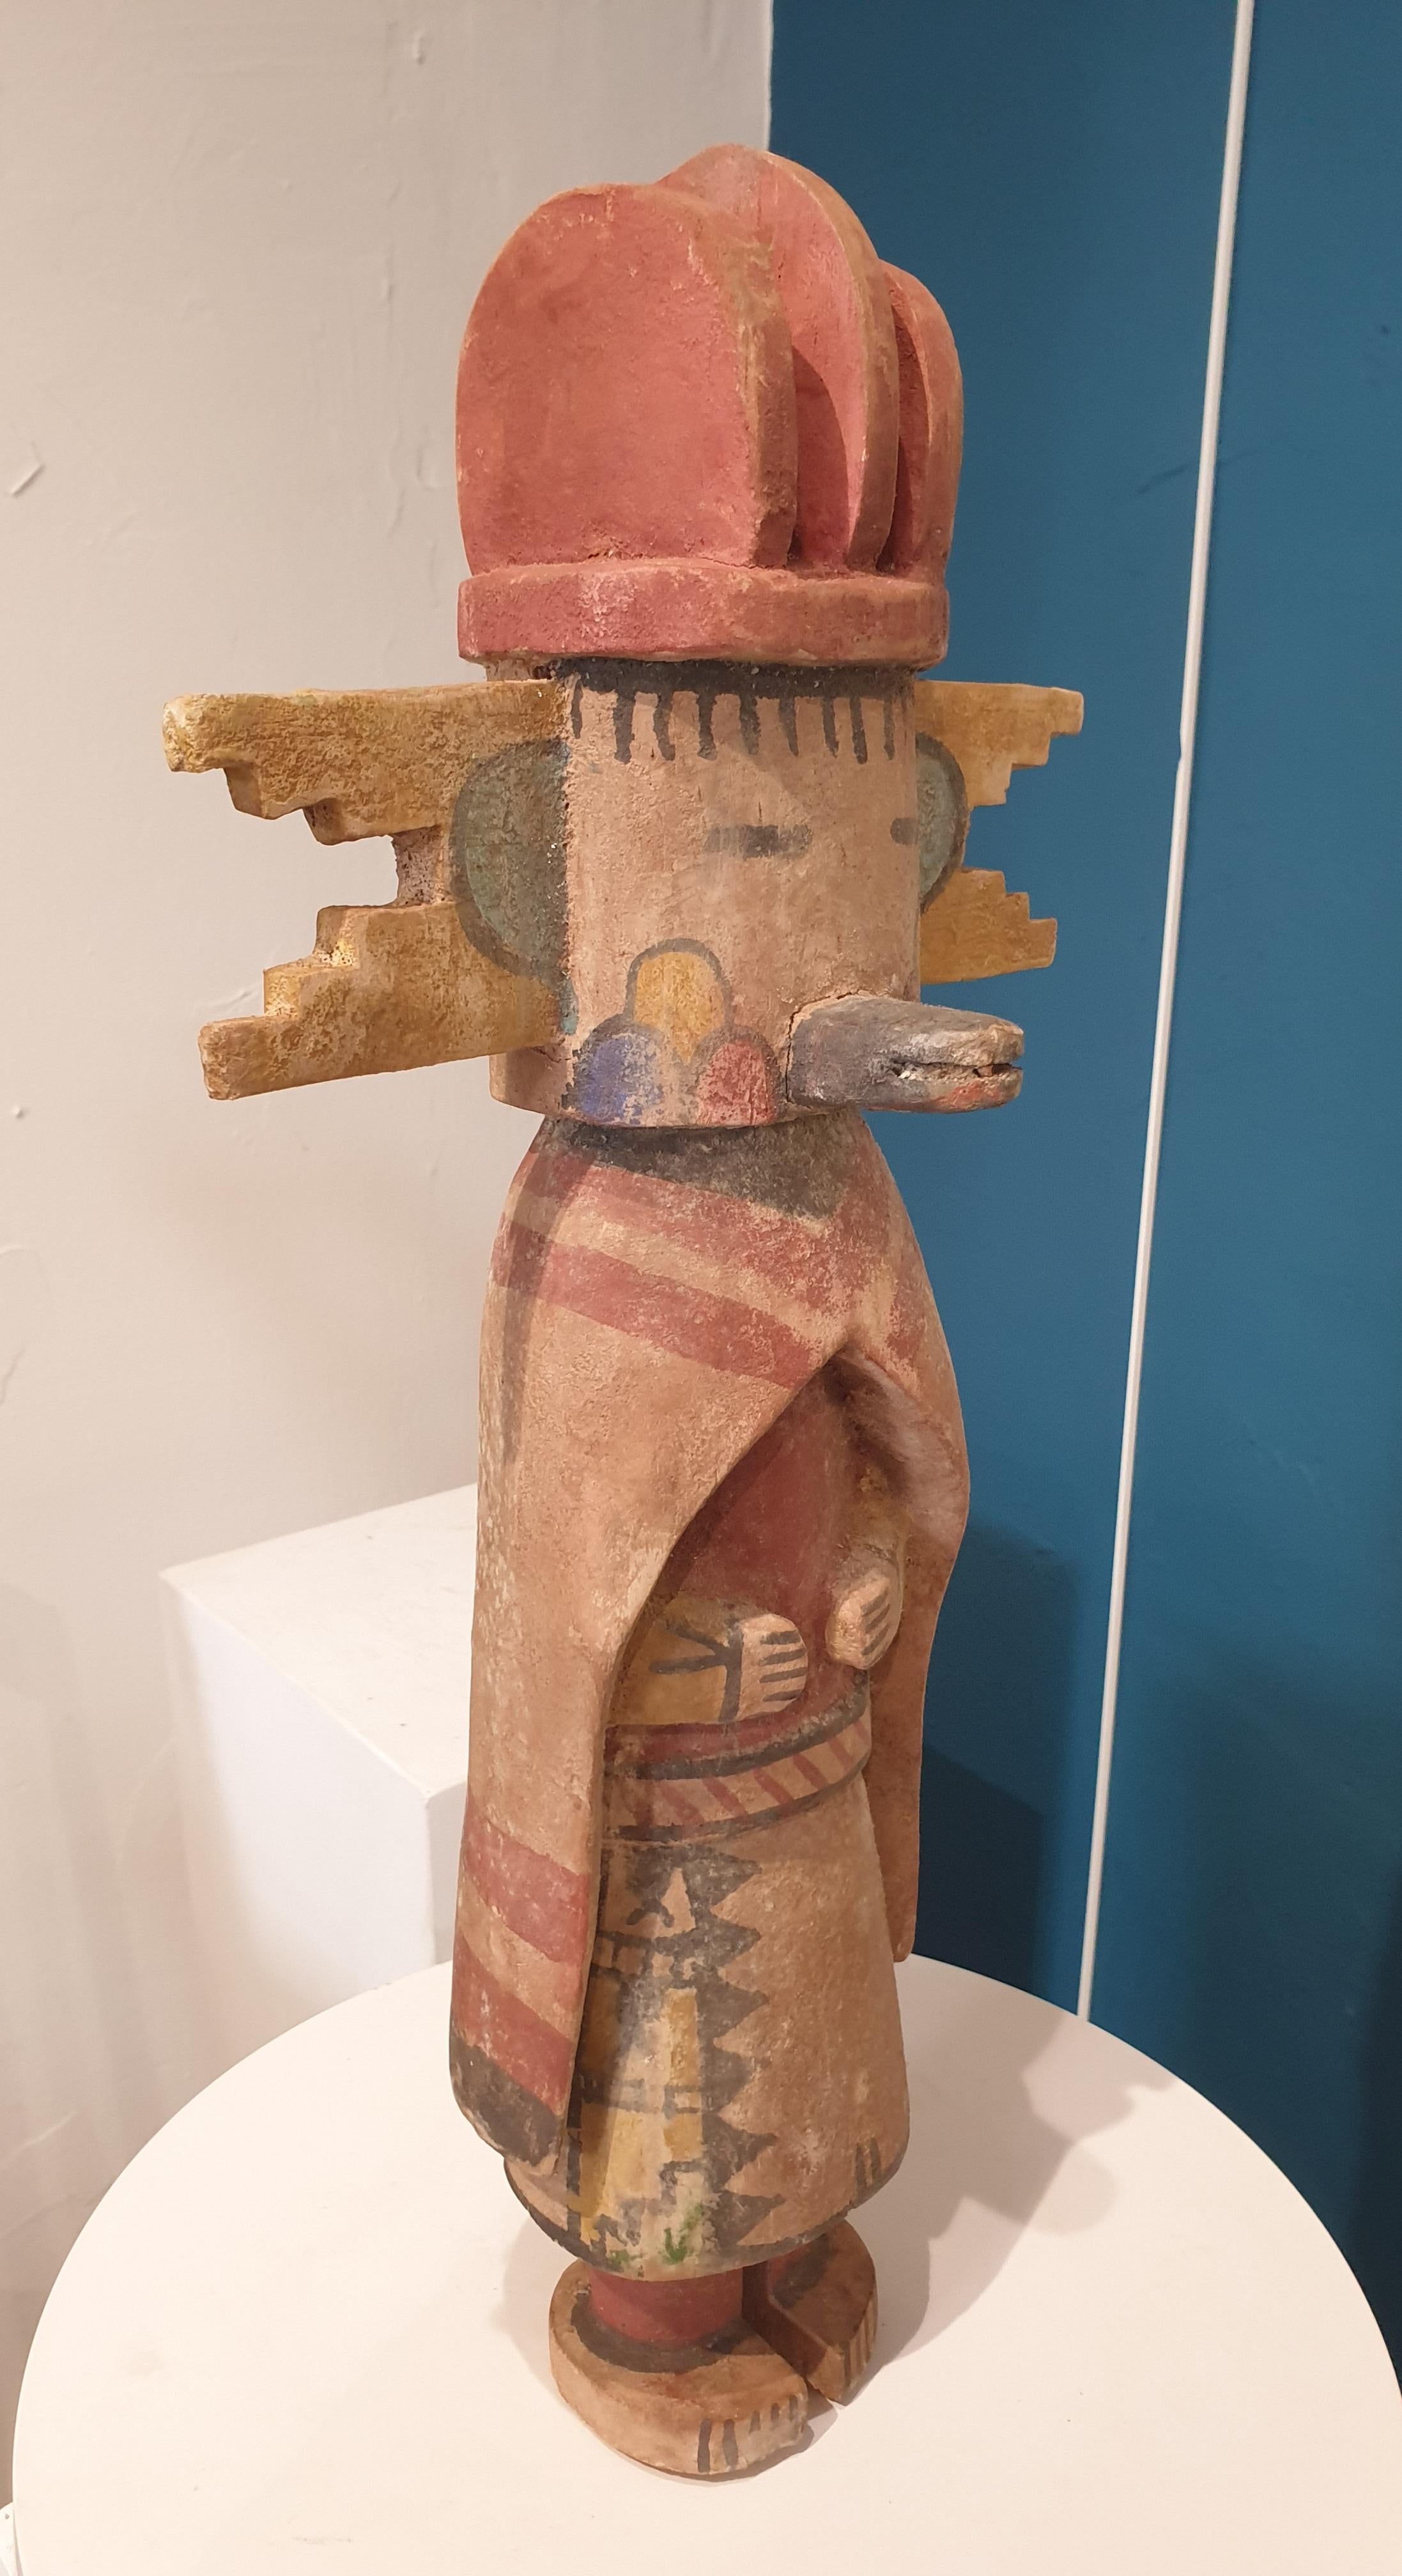 Native North American carved wood and painted effigy figure, Hopi Katsina or Kachina doll.  This is one of a group of eight dolls all individually priced, or available as a set, and on 1stdibs.

Hopi Katsina dolls are wooden effigies of the Katsinam